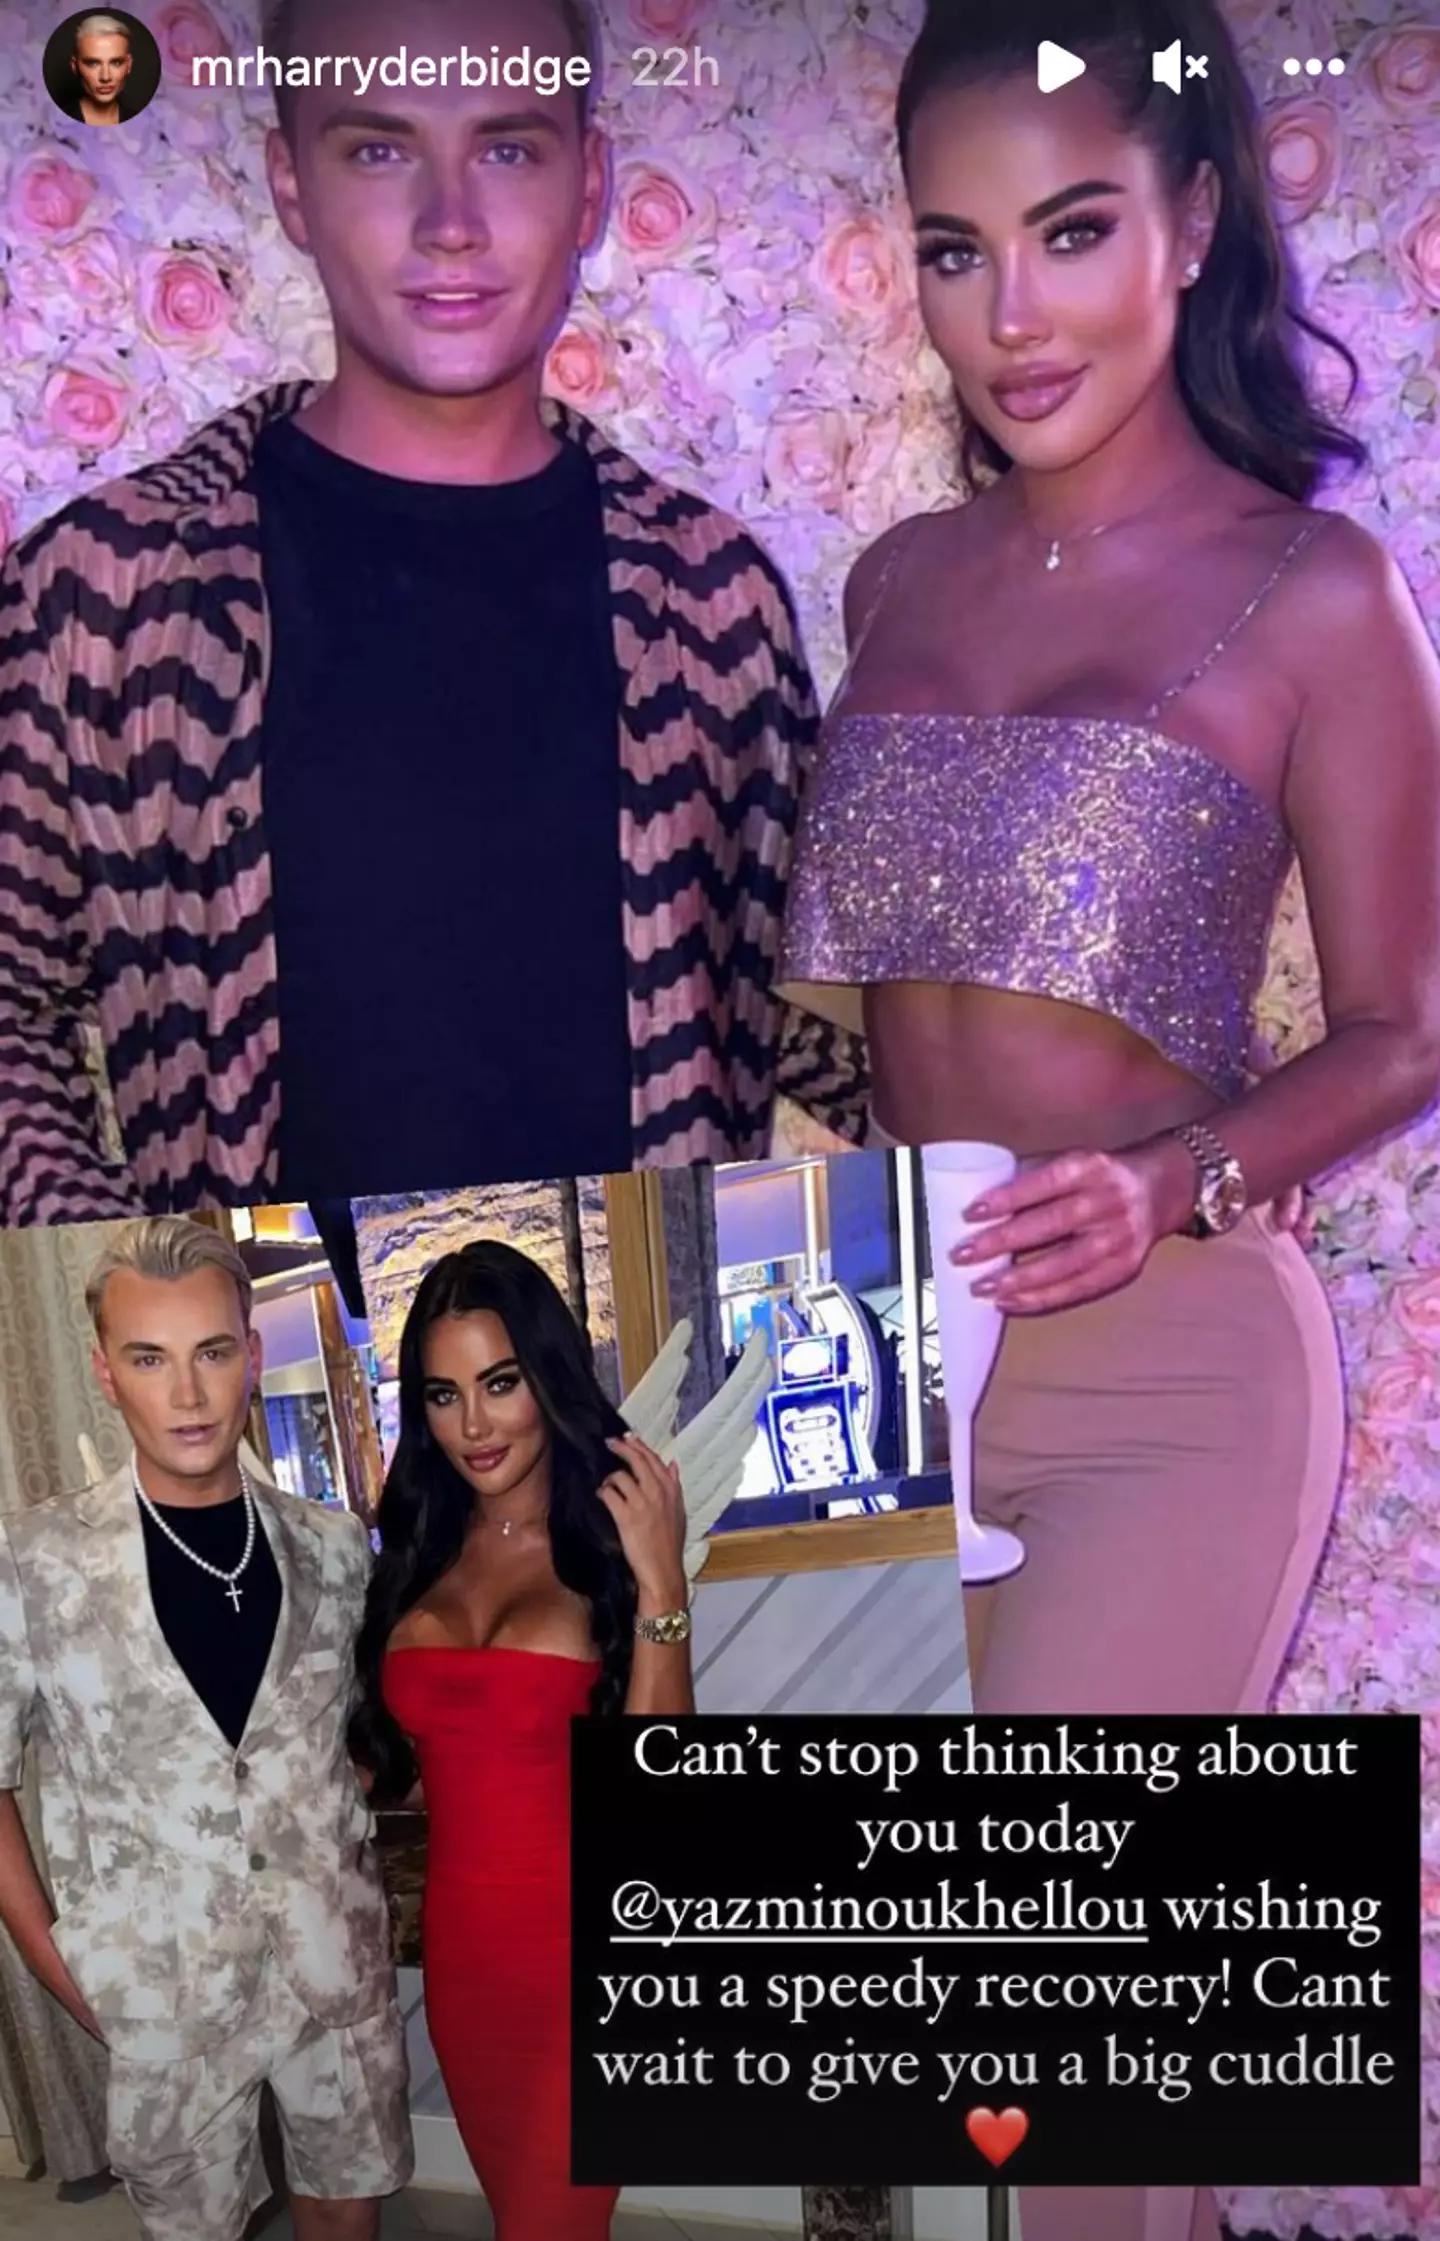 TOWIE stars paid tribute on social media.